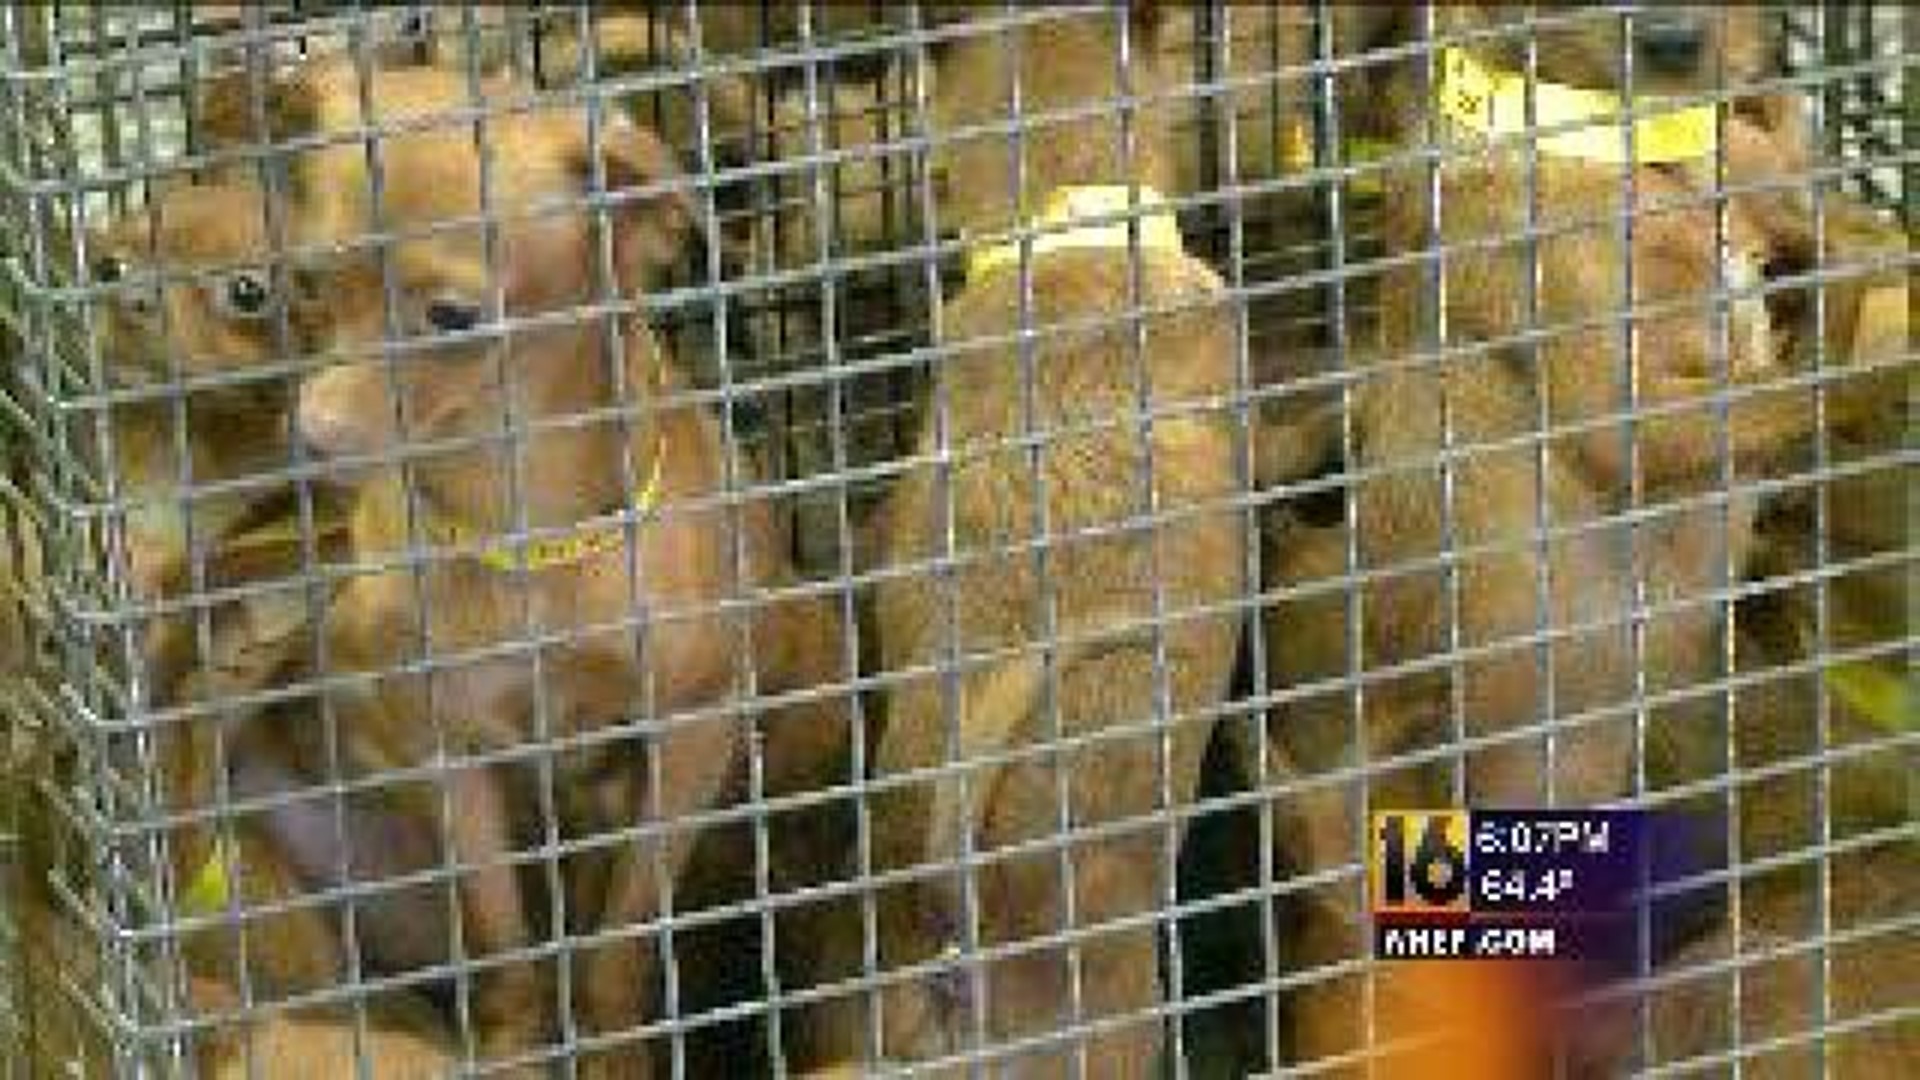 Officials: Hoarding, But Owners Cared For Dogs